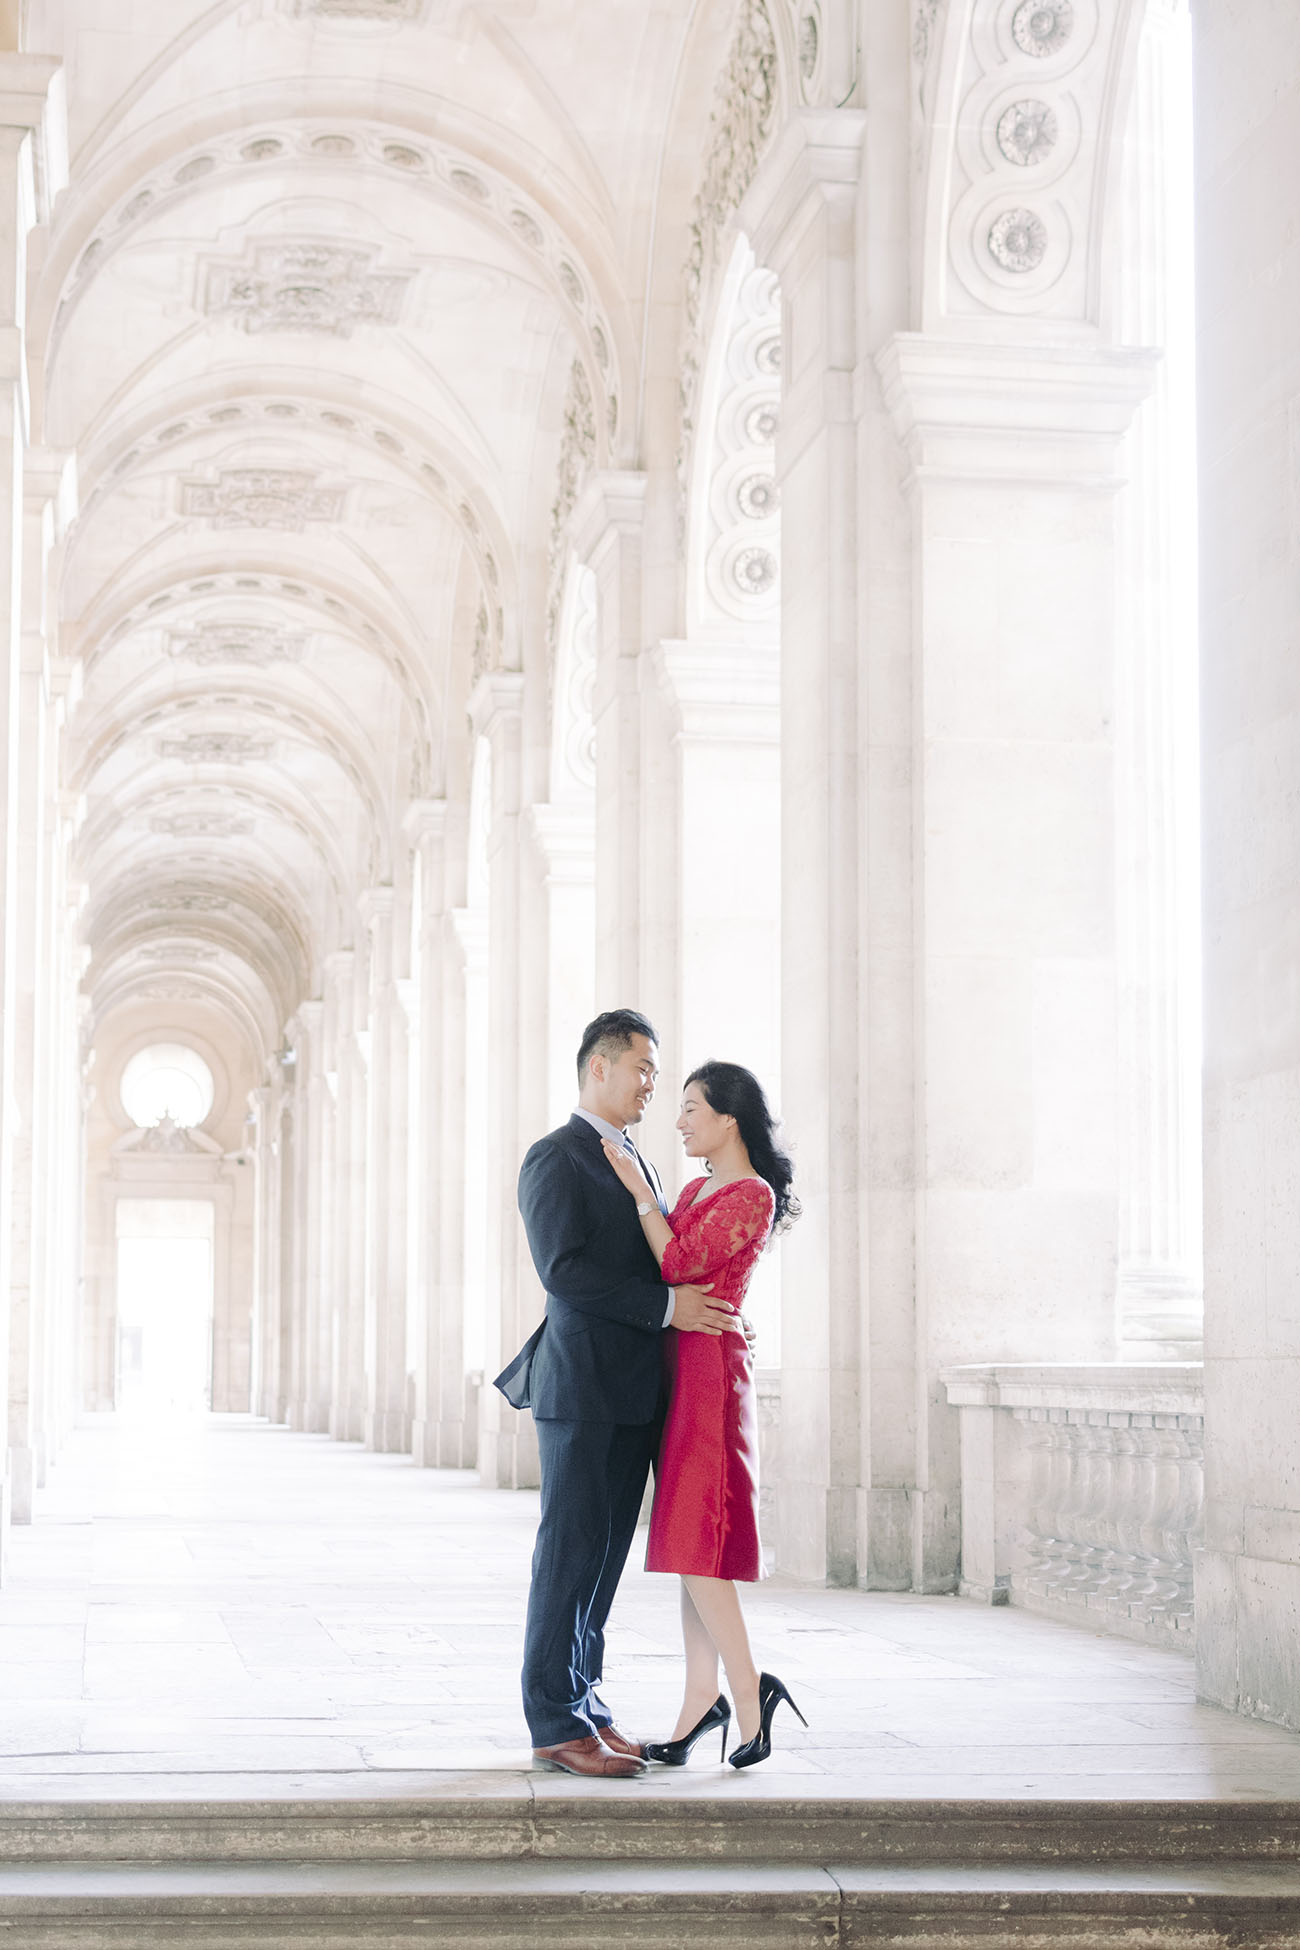  she put on her most beautiful red dress for photo pre wedding paris